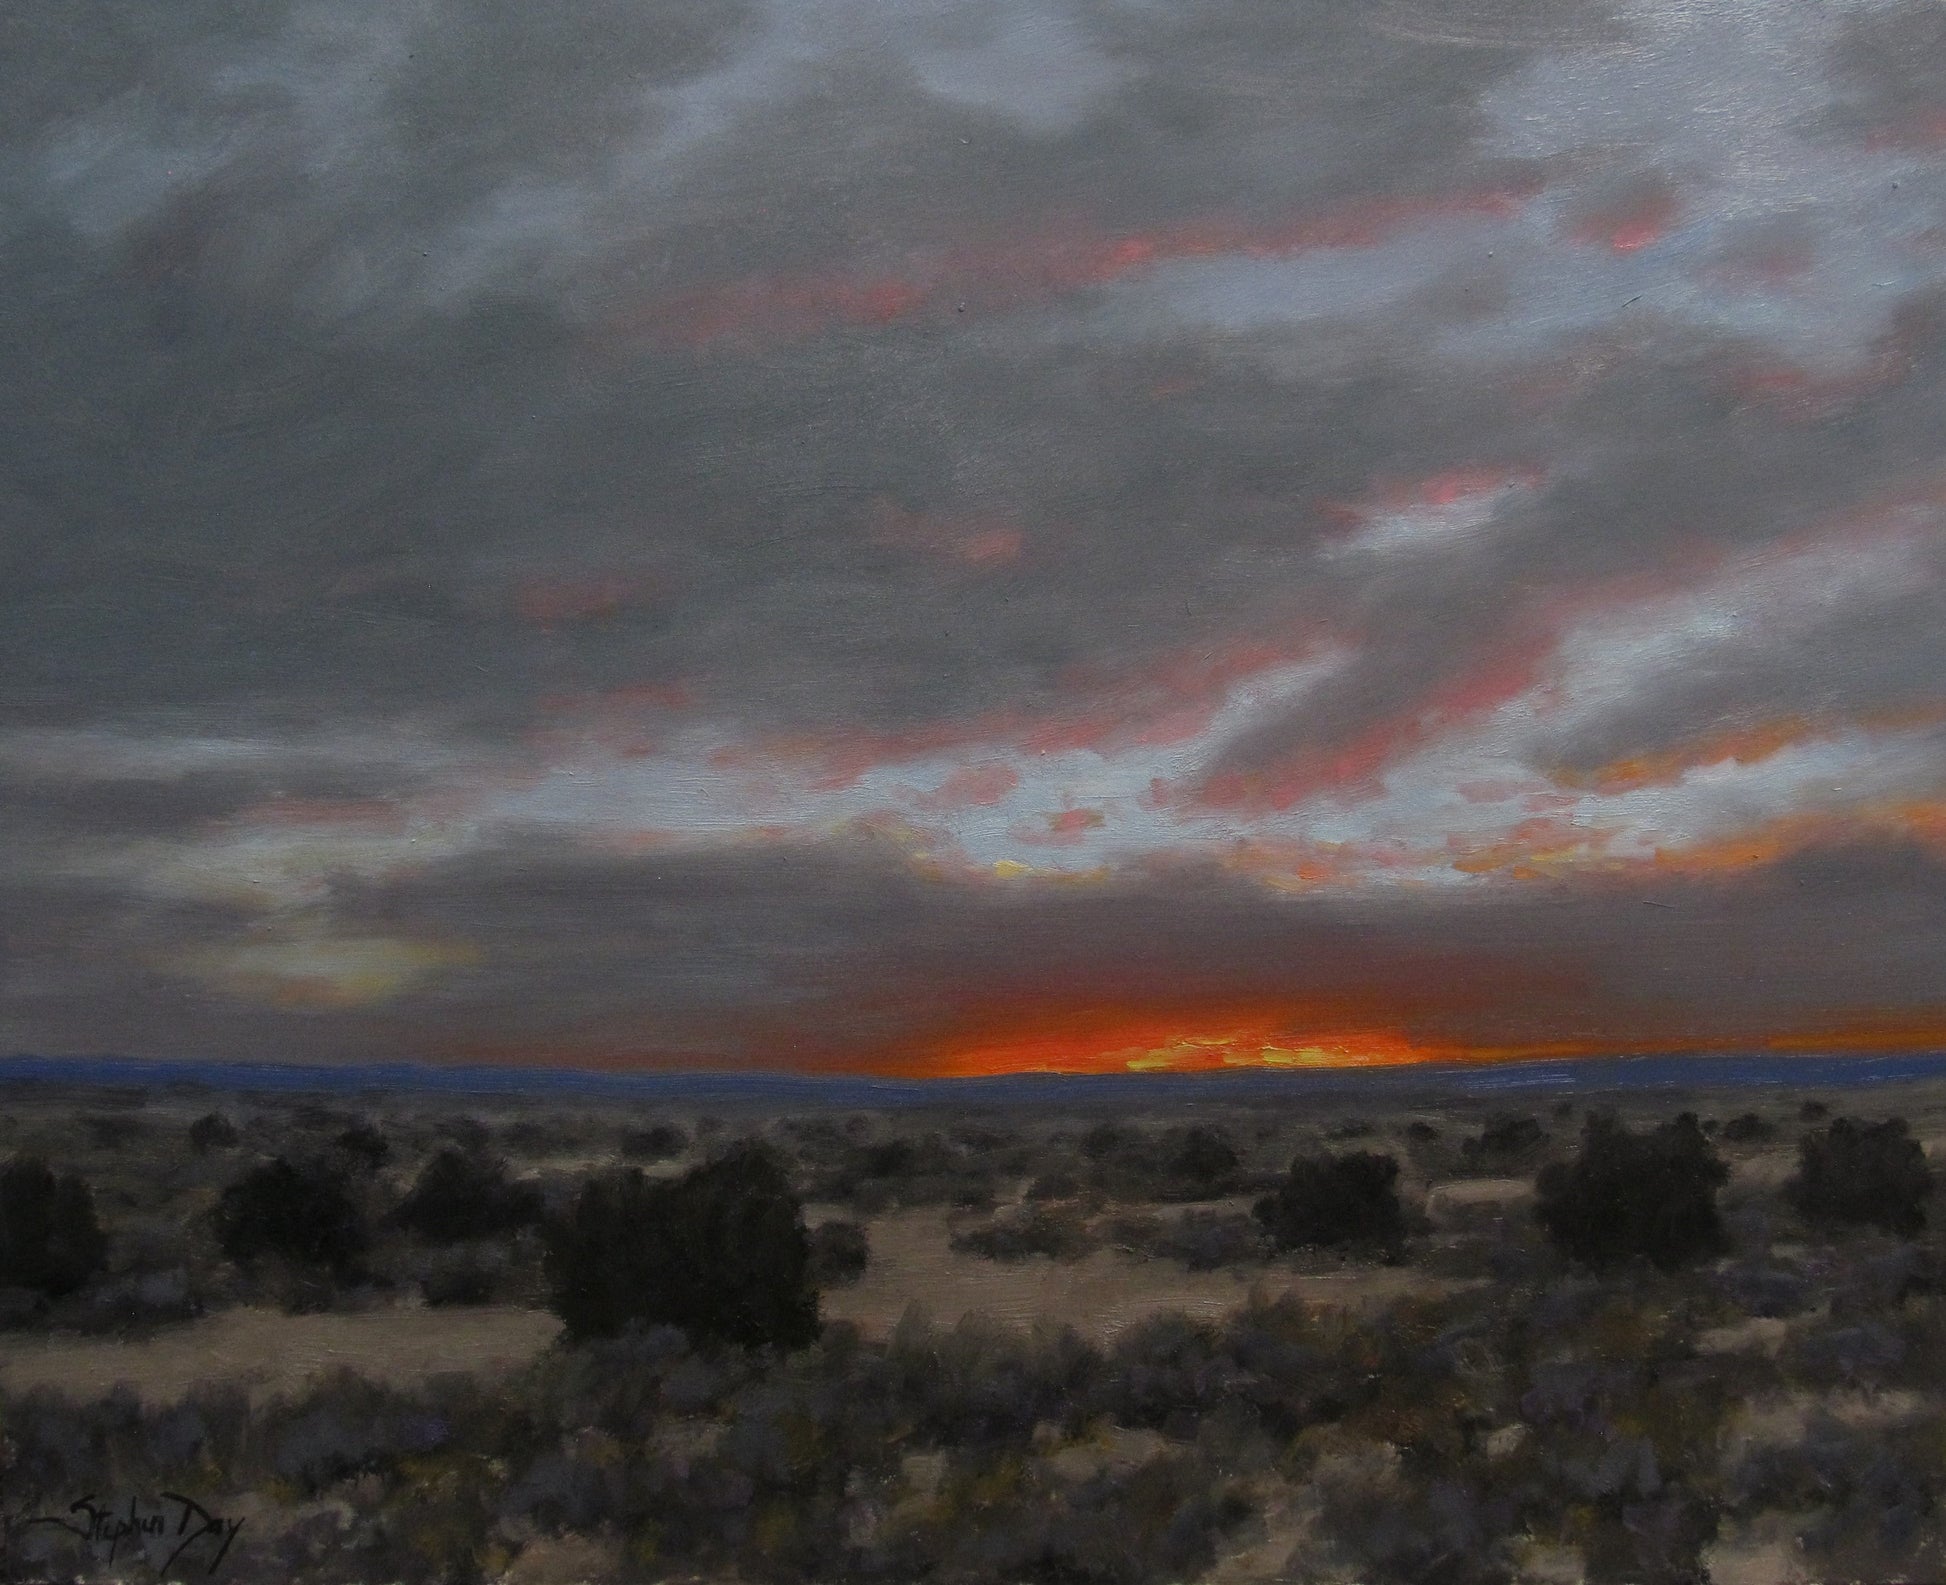 Distant Light-Painting-Stephen Day-Sorrel Sky Gallery